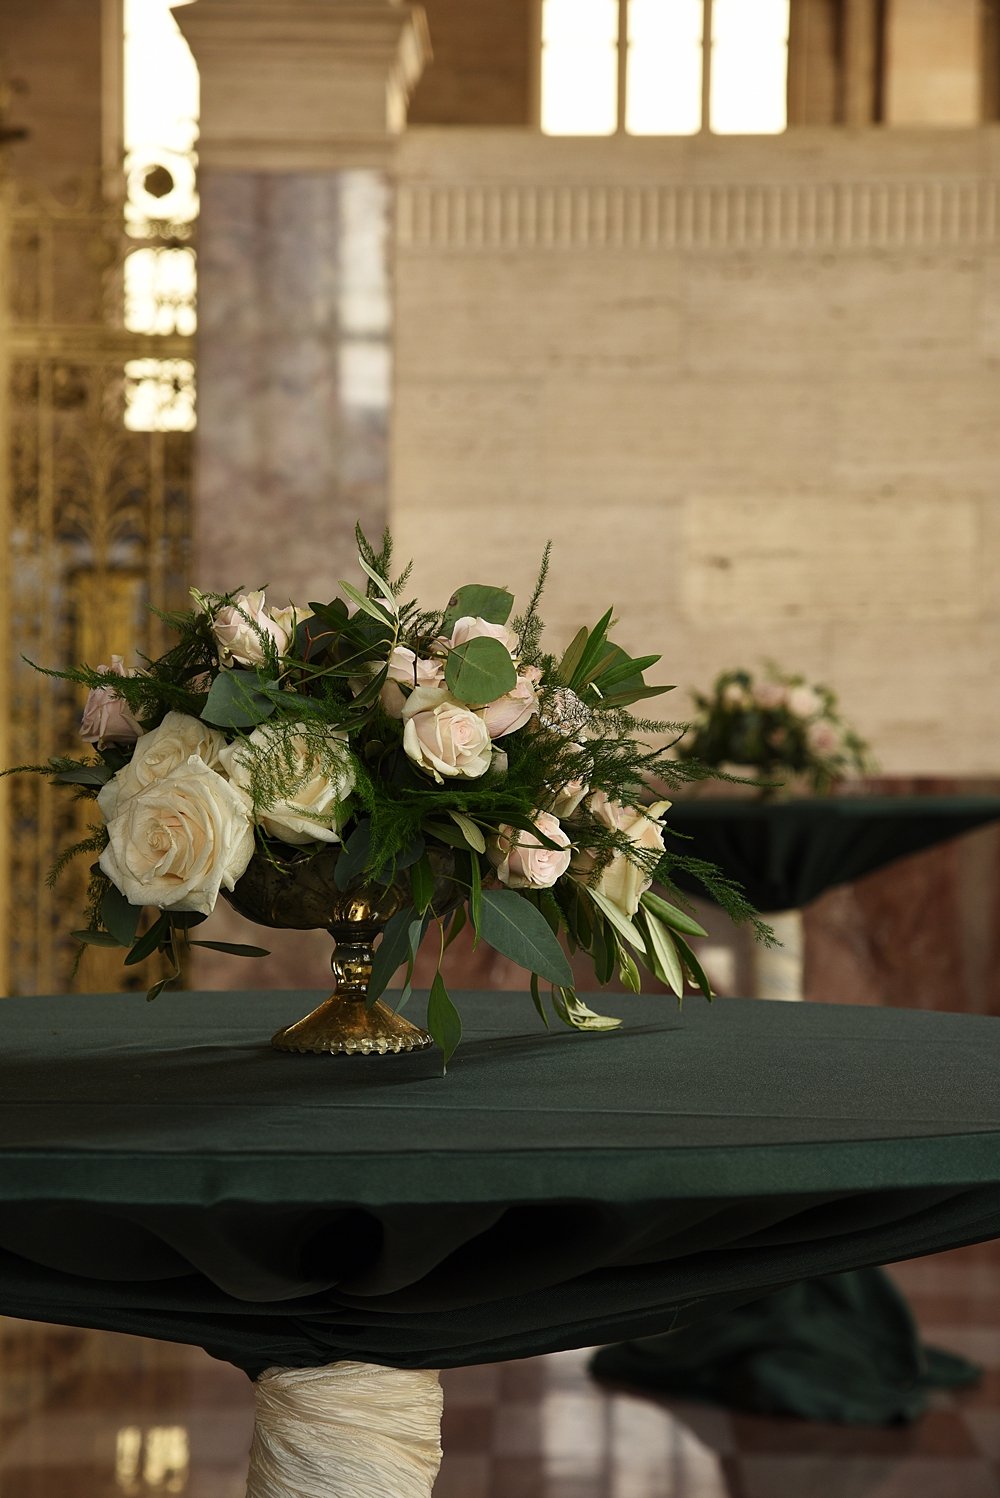 Organic, free-flowing floral arrangements | Vintage Garden Wedding at the Historic Alfred I DuPont Building in Miami, FL